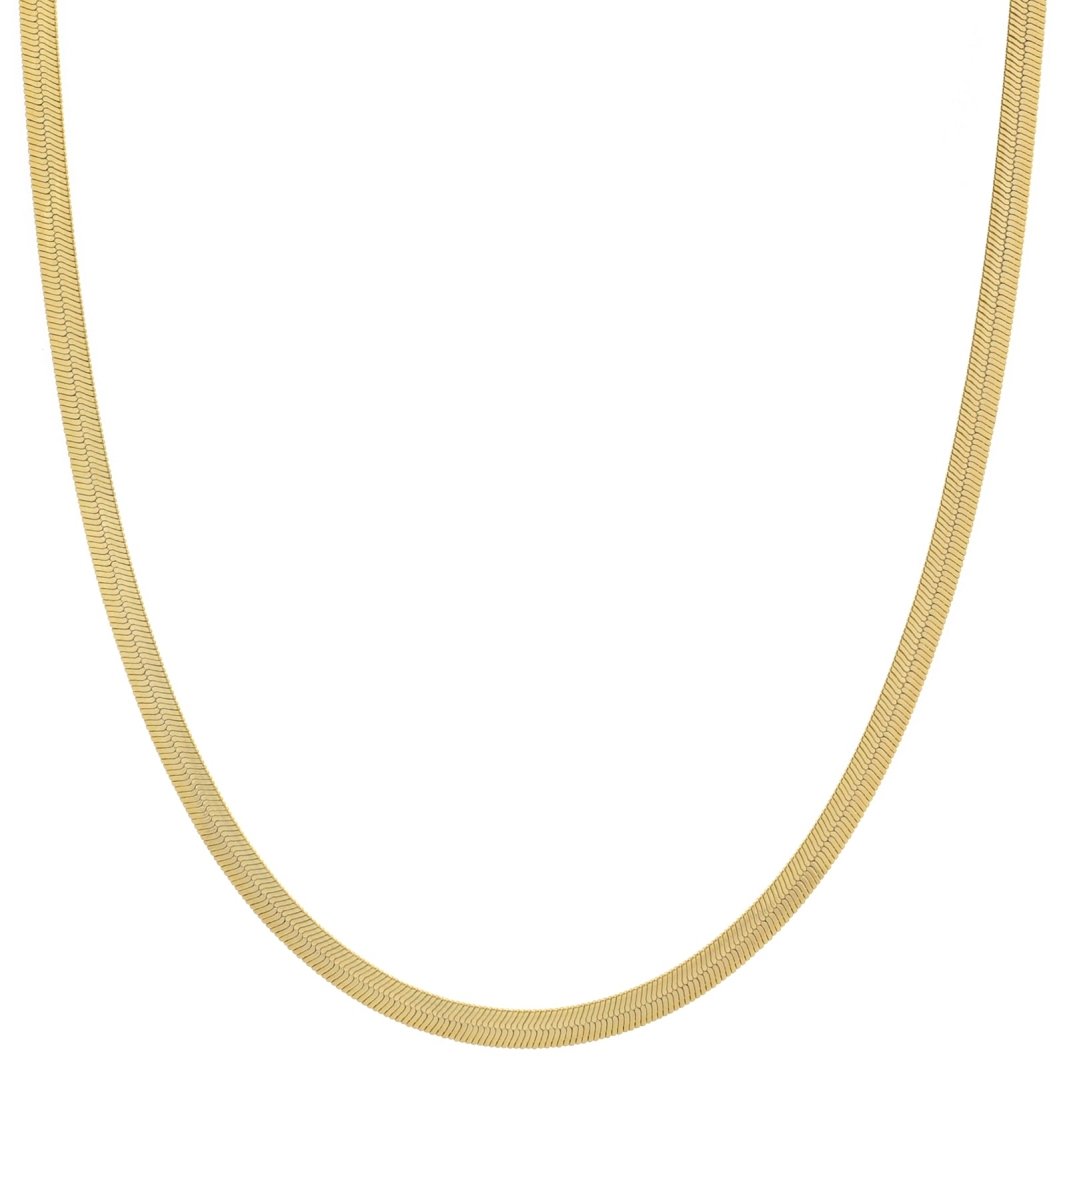 Herringbone Chain Necklace | 18K Gold Filled Herringbone Chain, Layered Necklace, Flat Snake Chain, Skinny Gold Chain Everyday Wear | Stainless Steel, Gold Filled 3mm 4mm | WA-930 to WA-936 - DLUXCA